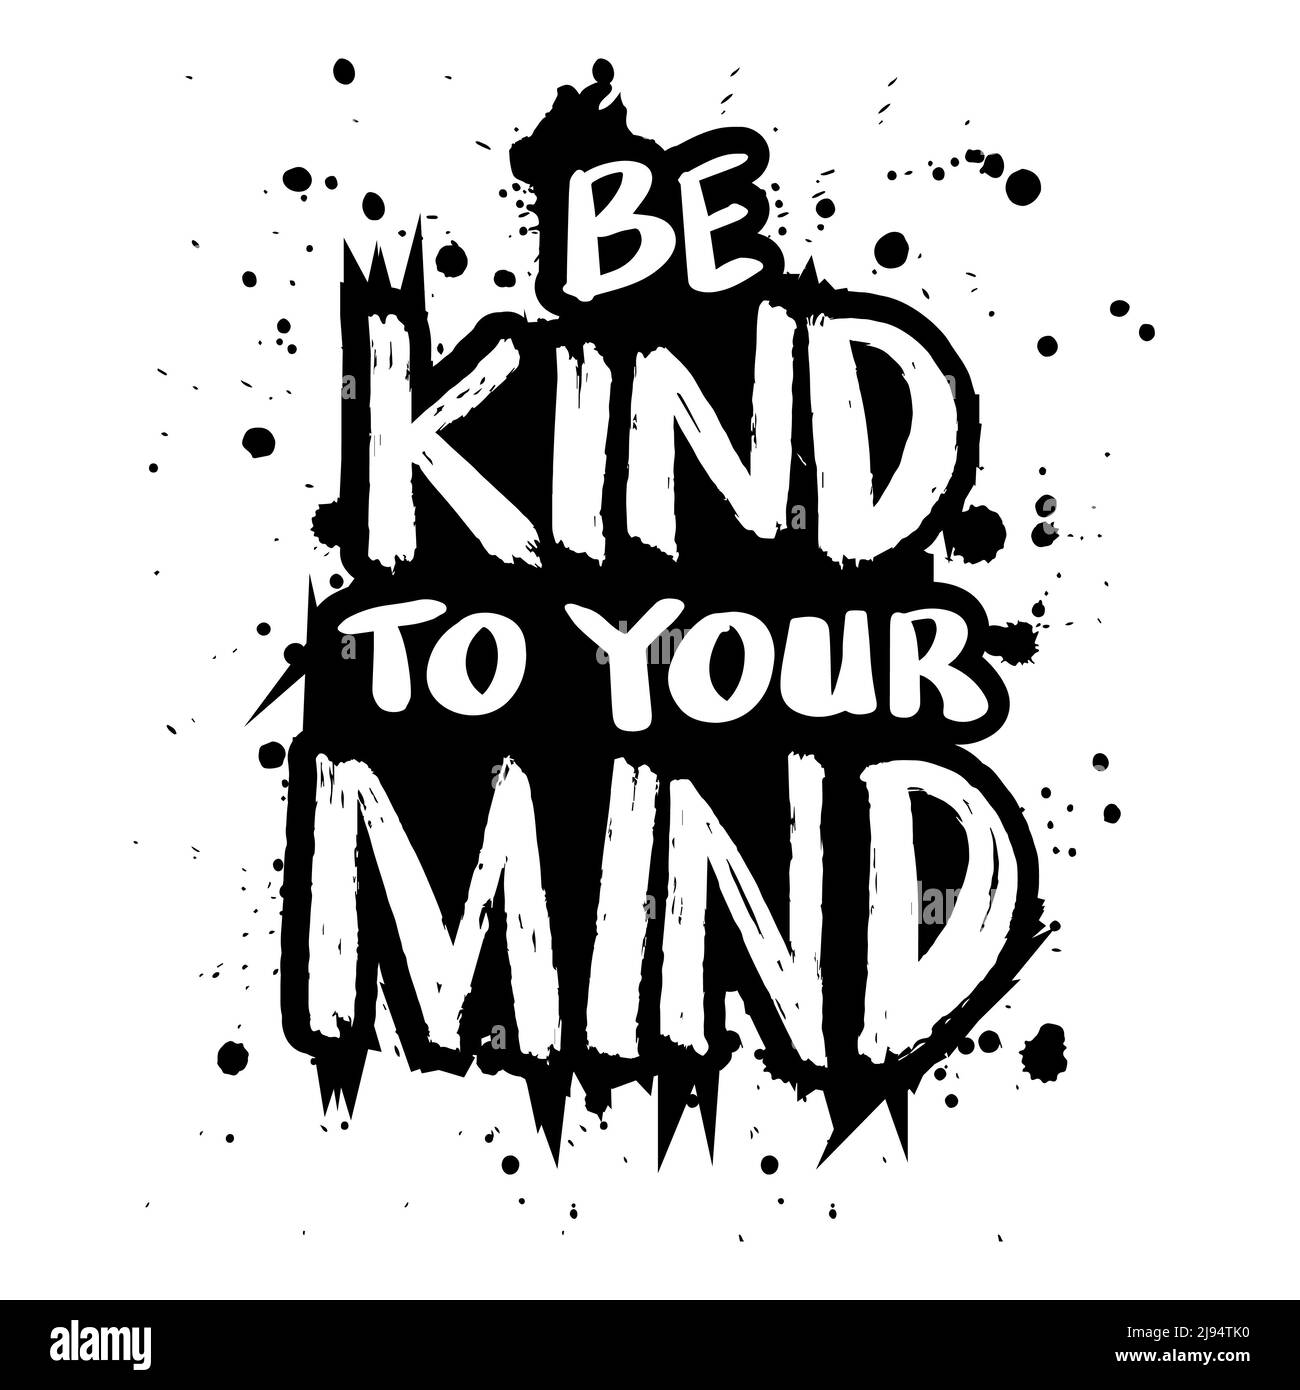 Be kind to your mind. Poster quote. Stock Photo